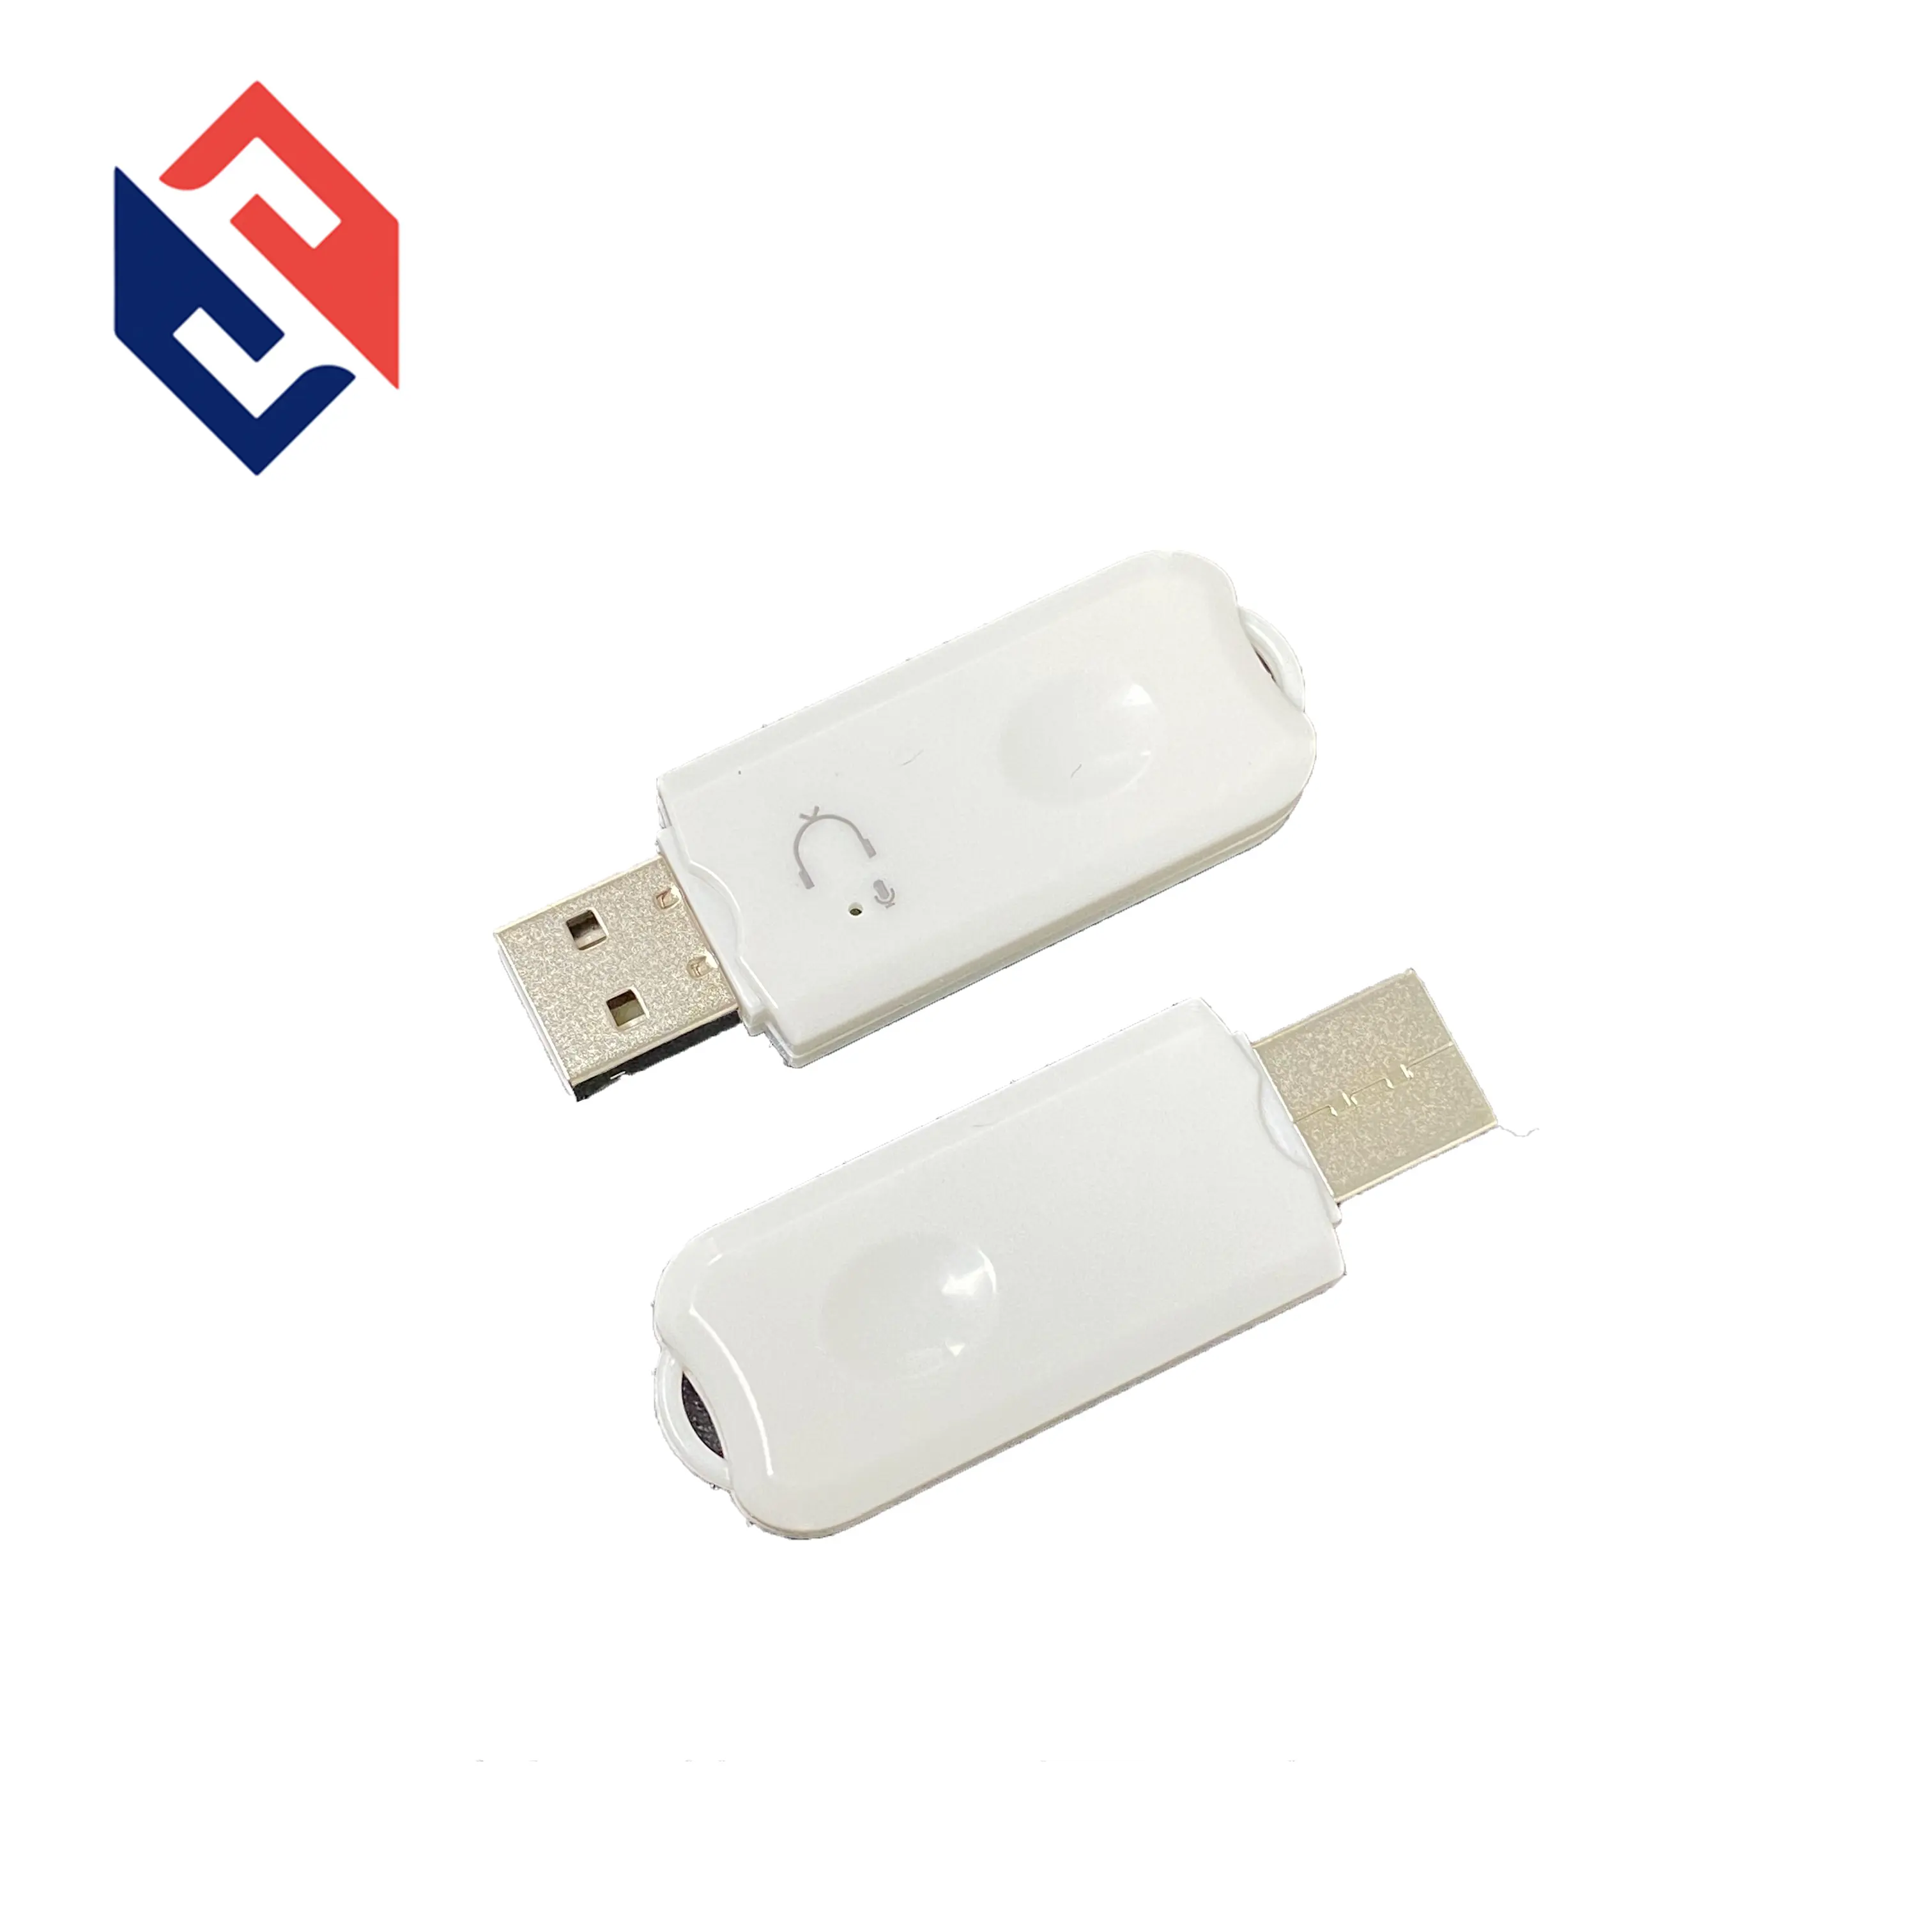 USB Dongle Bluetooth 2.1 + EDR Adapter Dongle maxesla không dây Bluetooth Transmitter Receiver USB Bluetooth Dongle 5.0